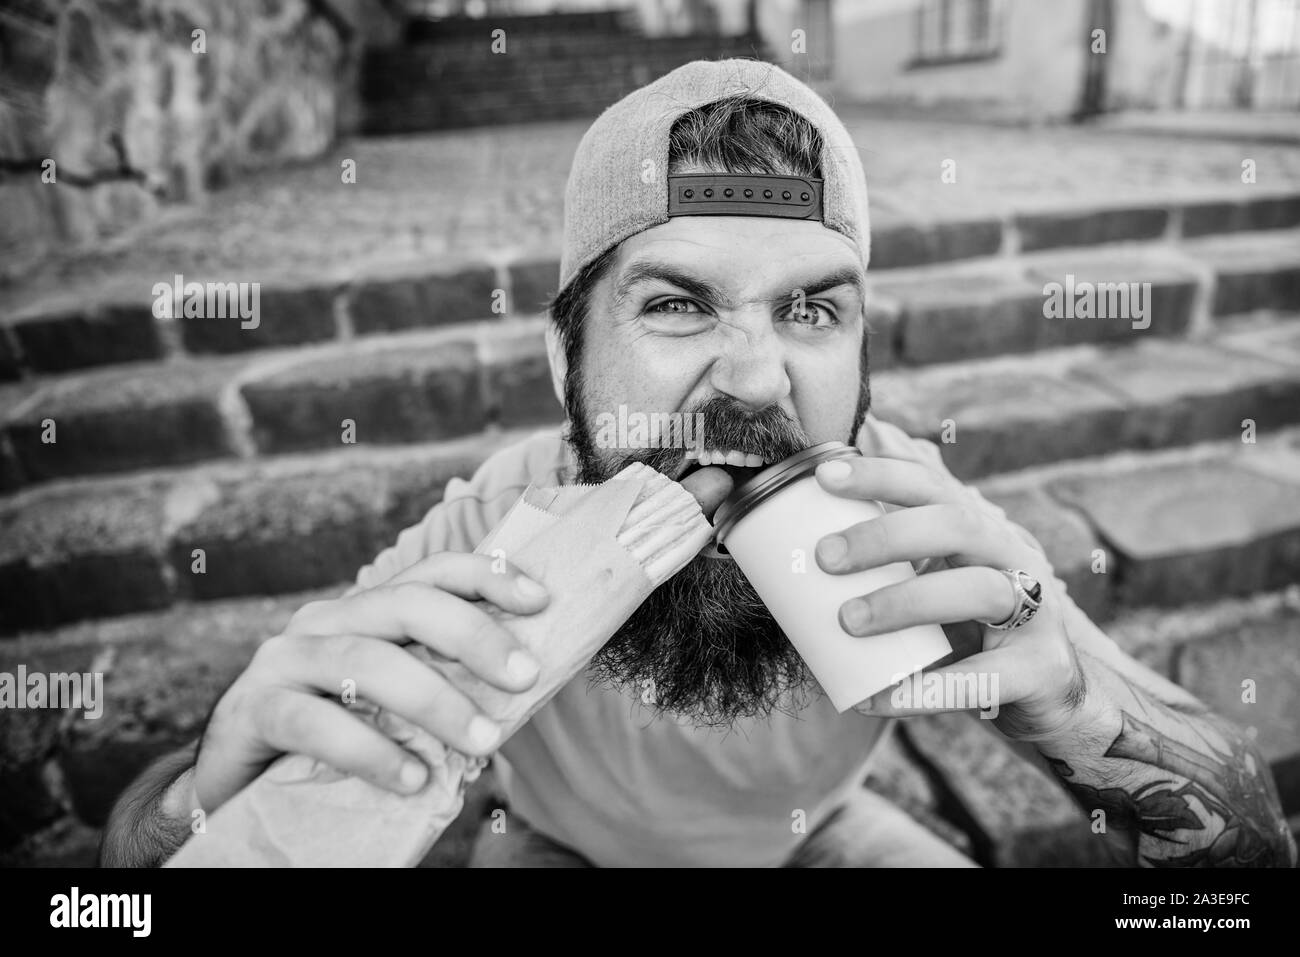 Snack for good mood. Guy eating hot dog. Street food concept. Man bearded eat tasty sausage and drink paper cup. Urban lifestyle nutrition. Junk food. Carefree hipster eat junk food while sit stairs. Stock Photo